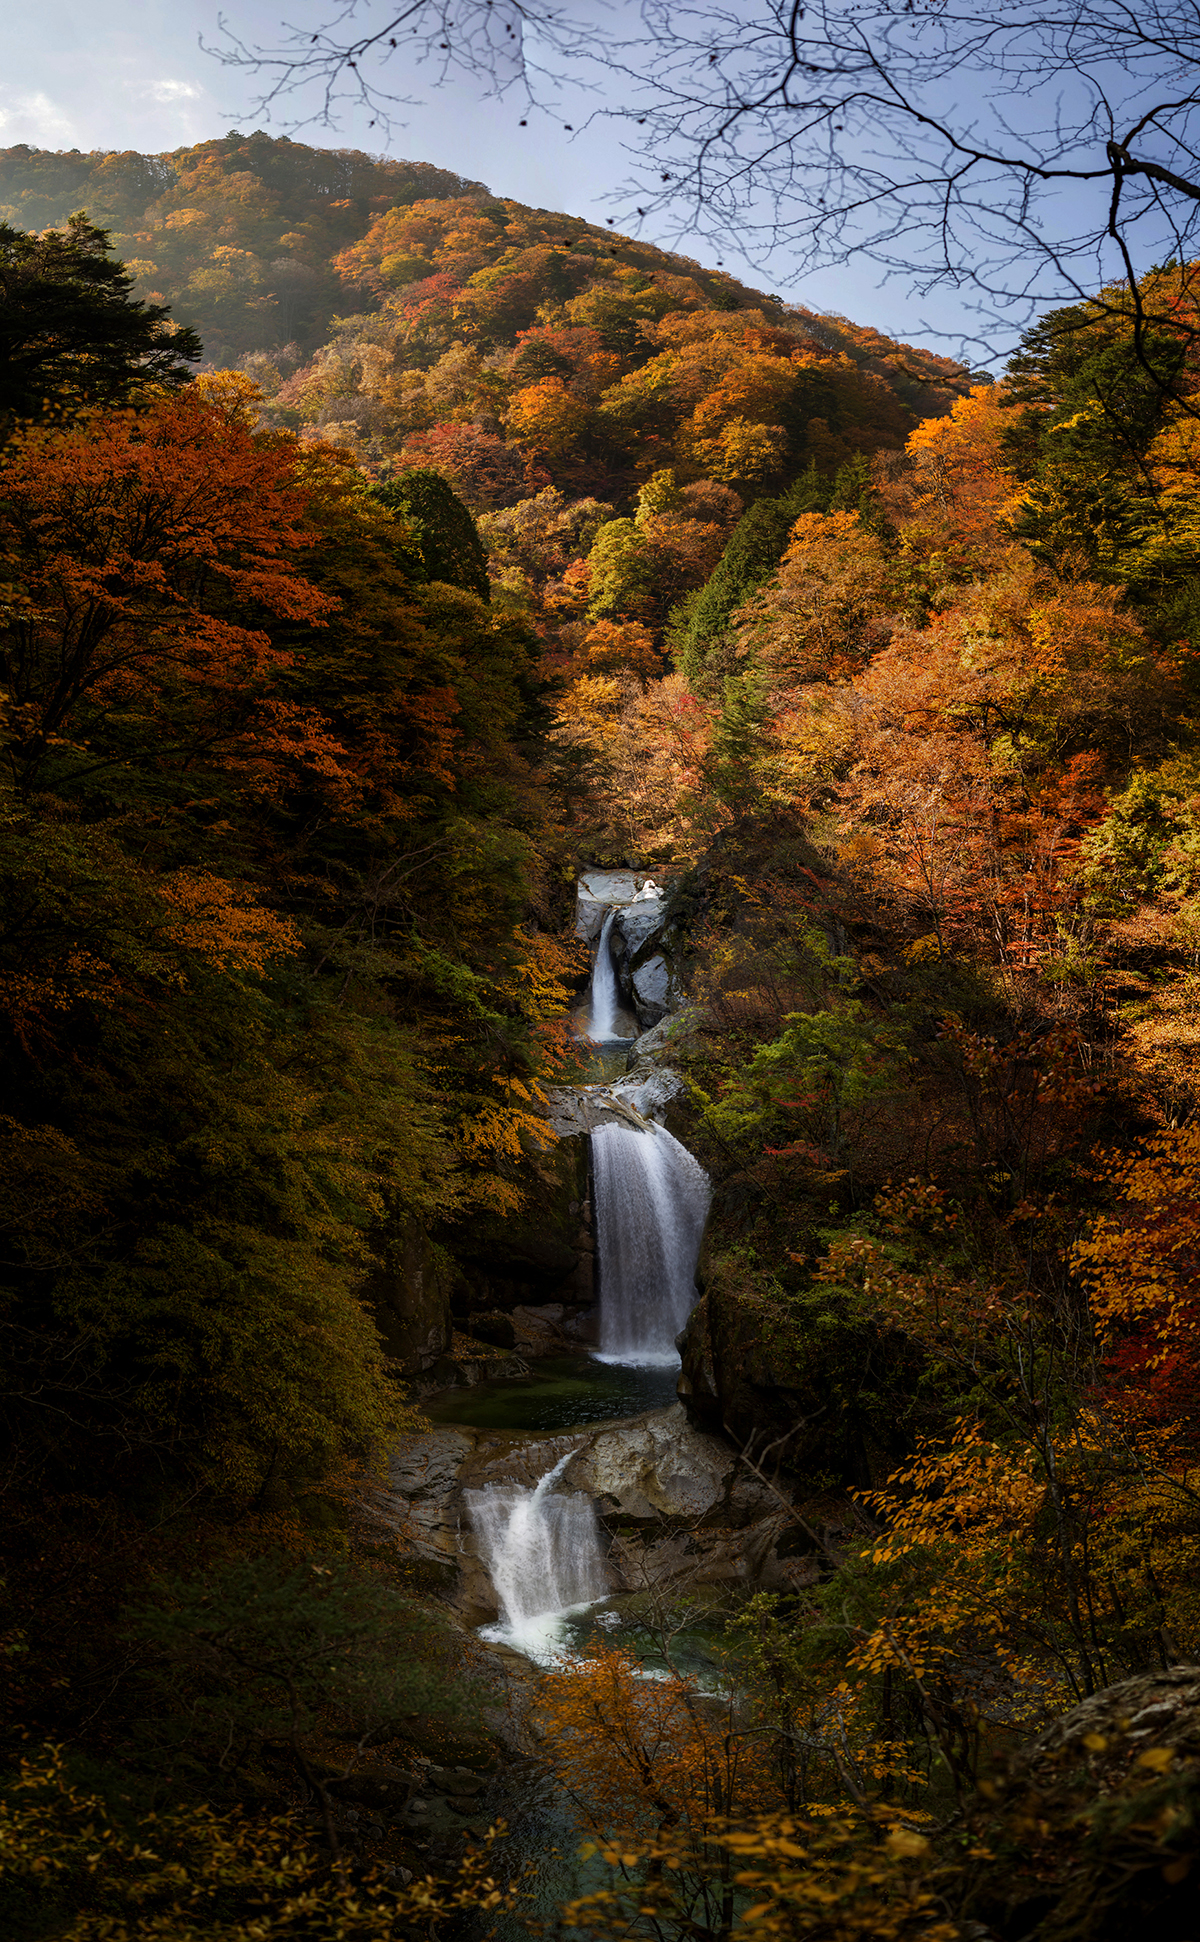 A waterfall surrounded by red and orange trees